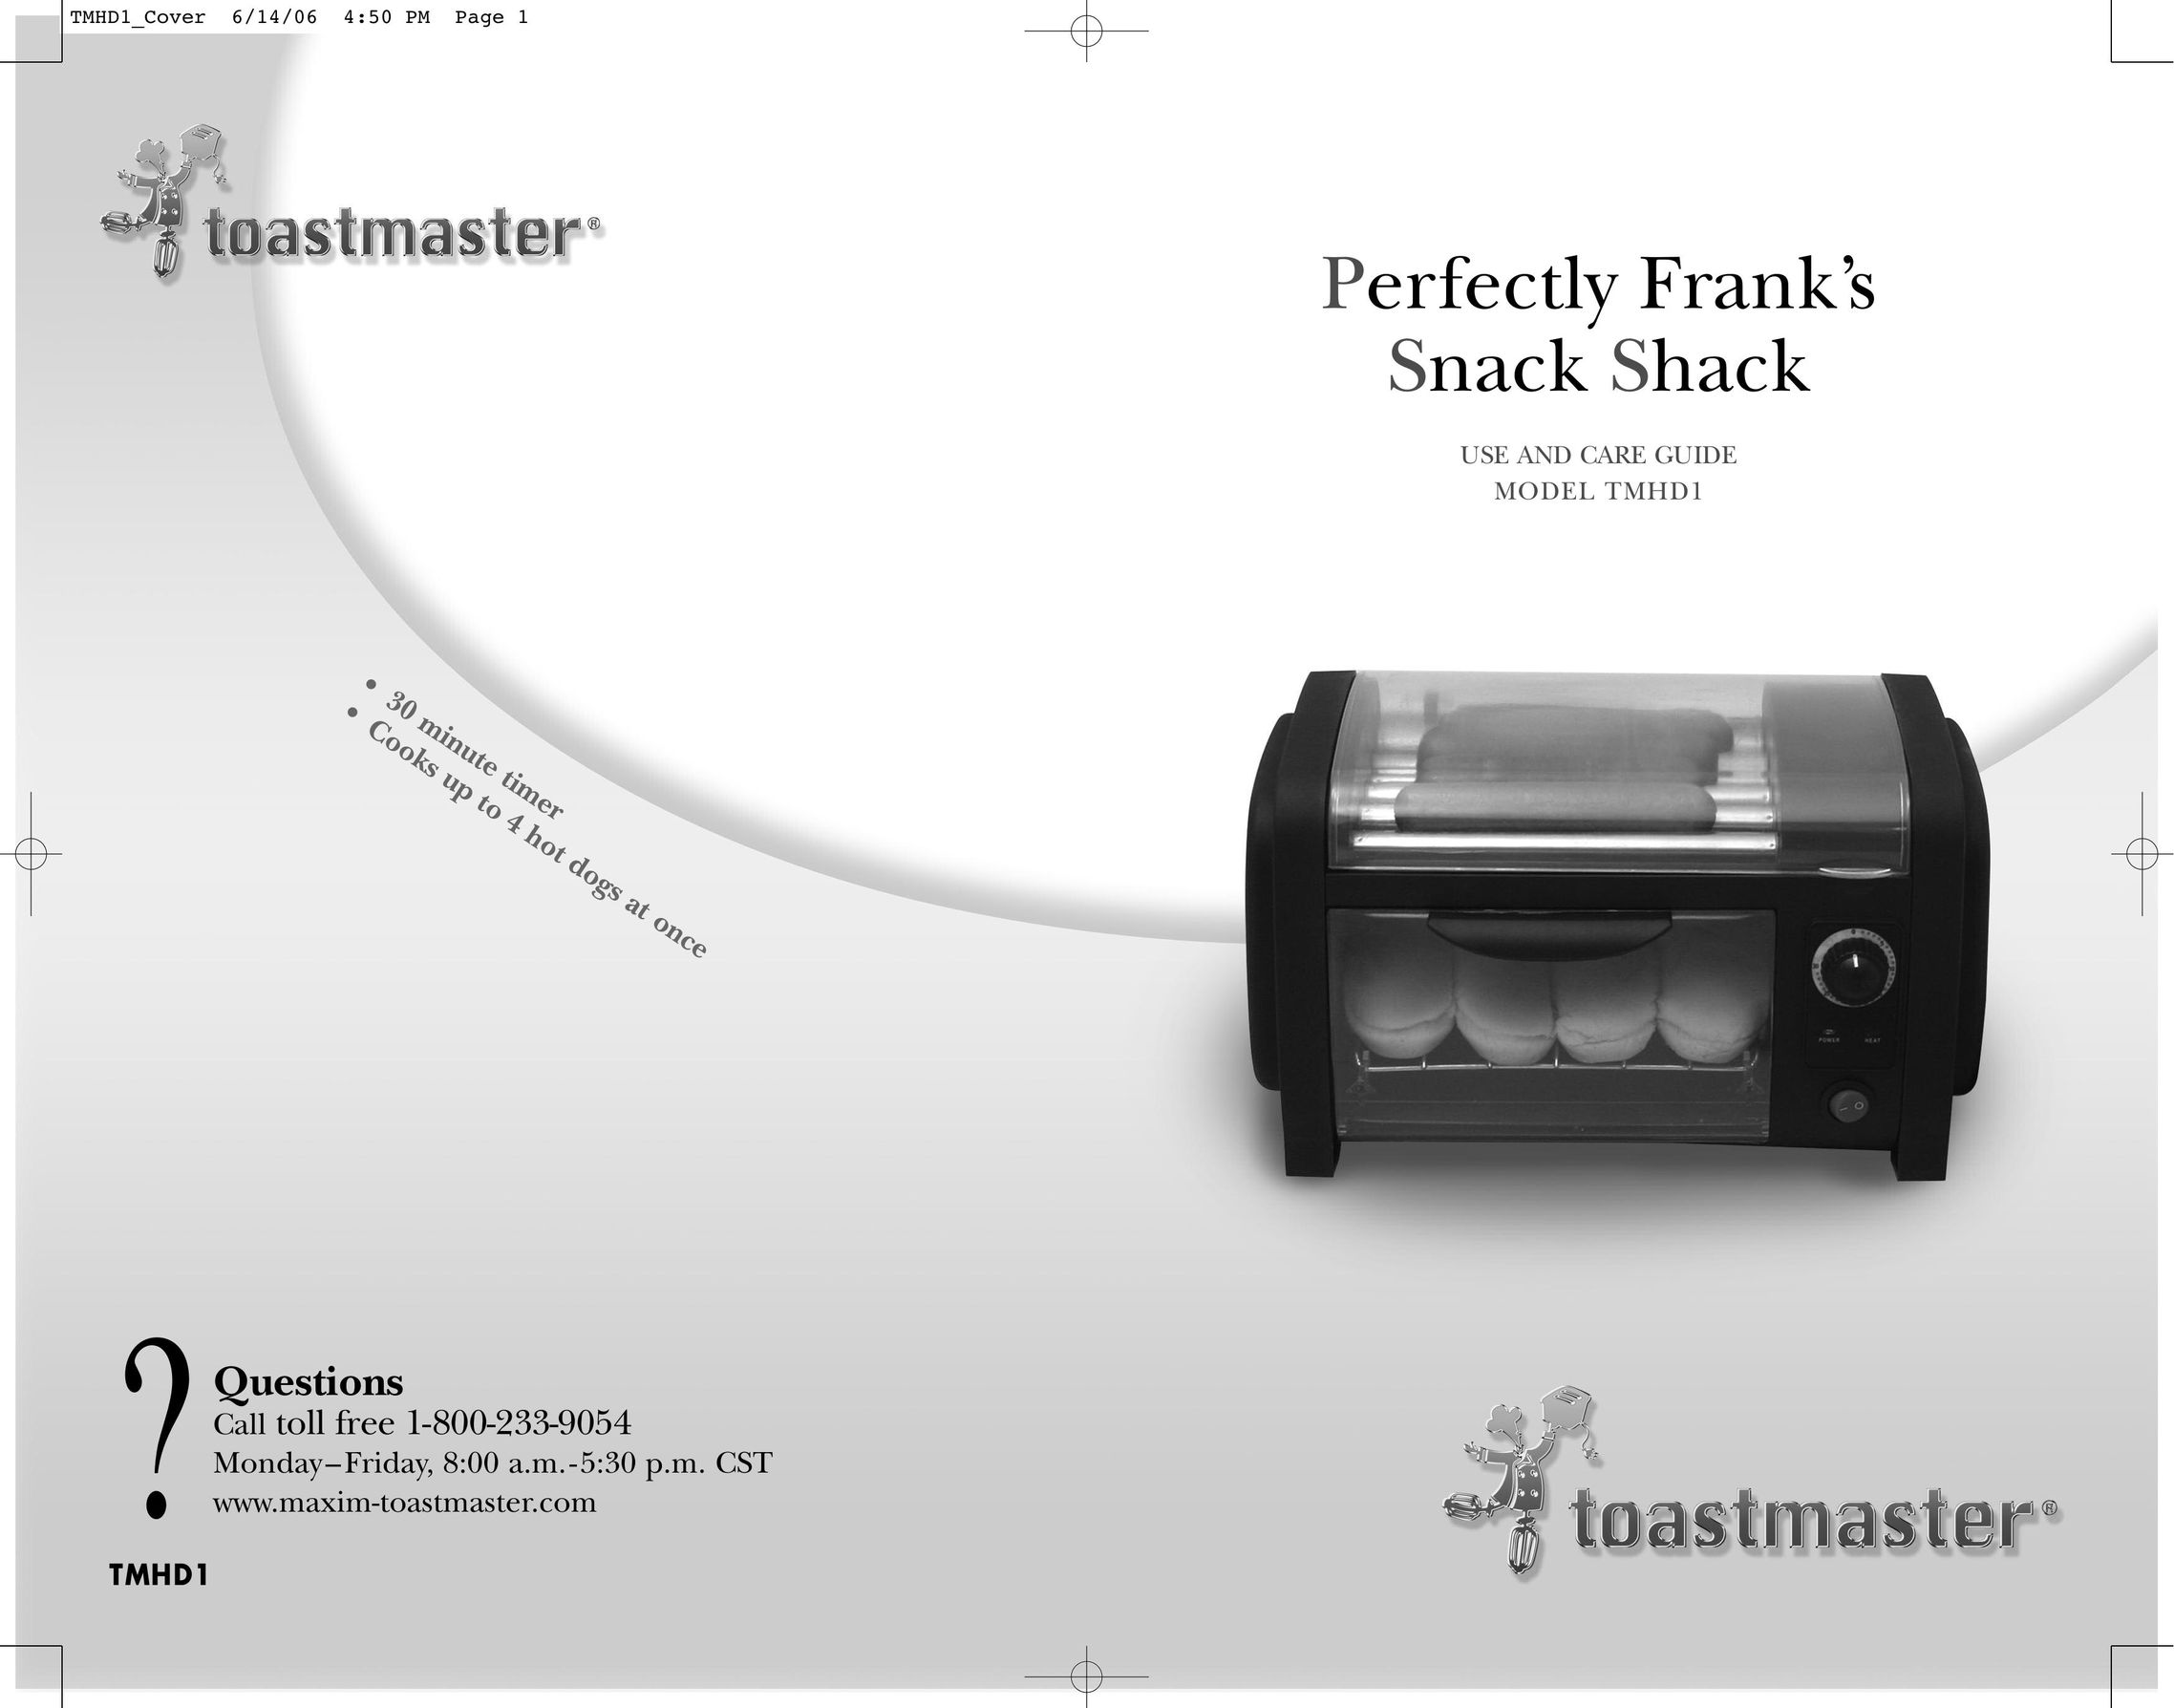 Toastmaster TMHD1 Convection Oven User Manual